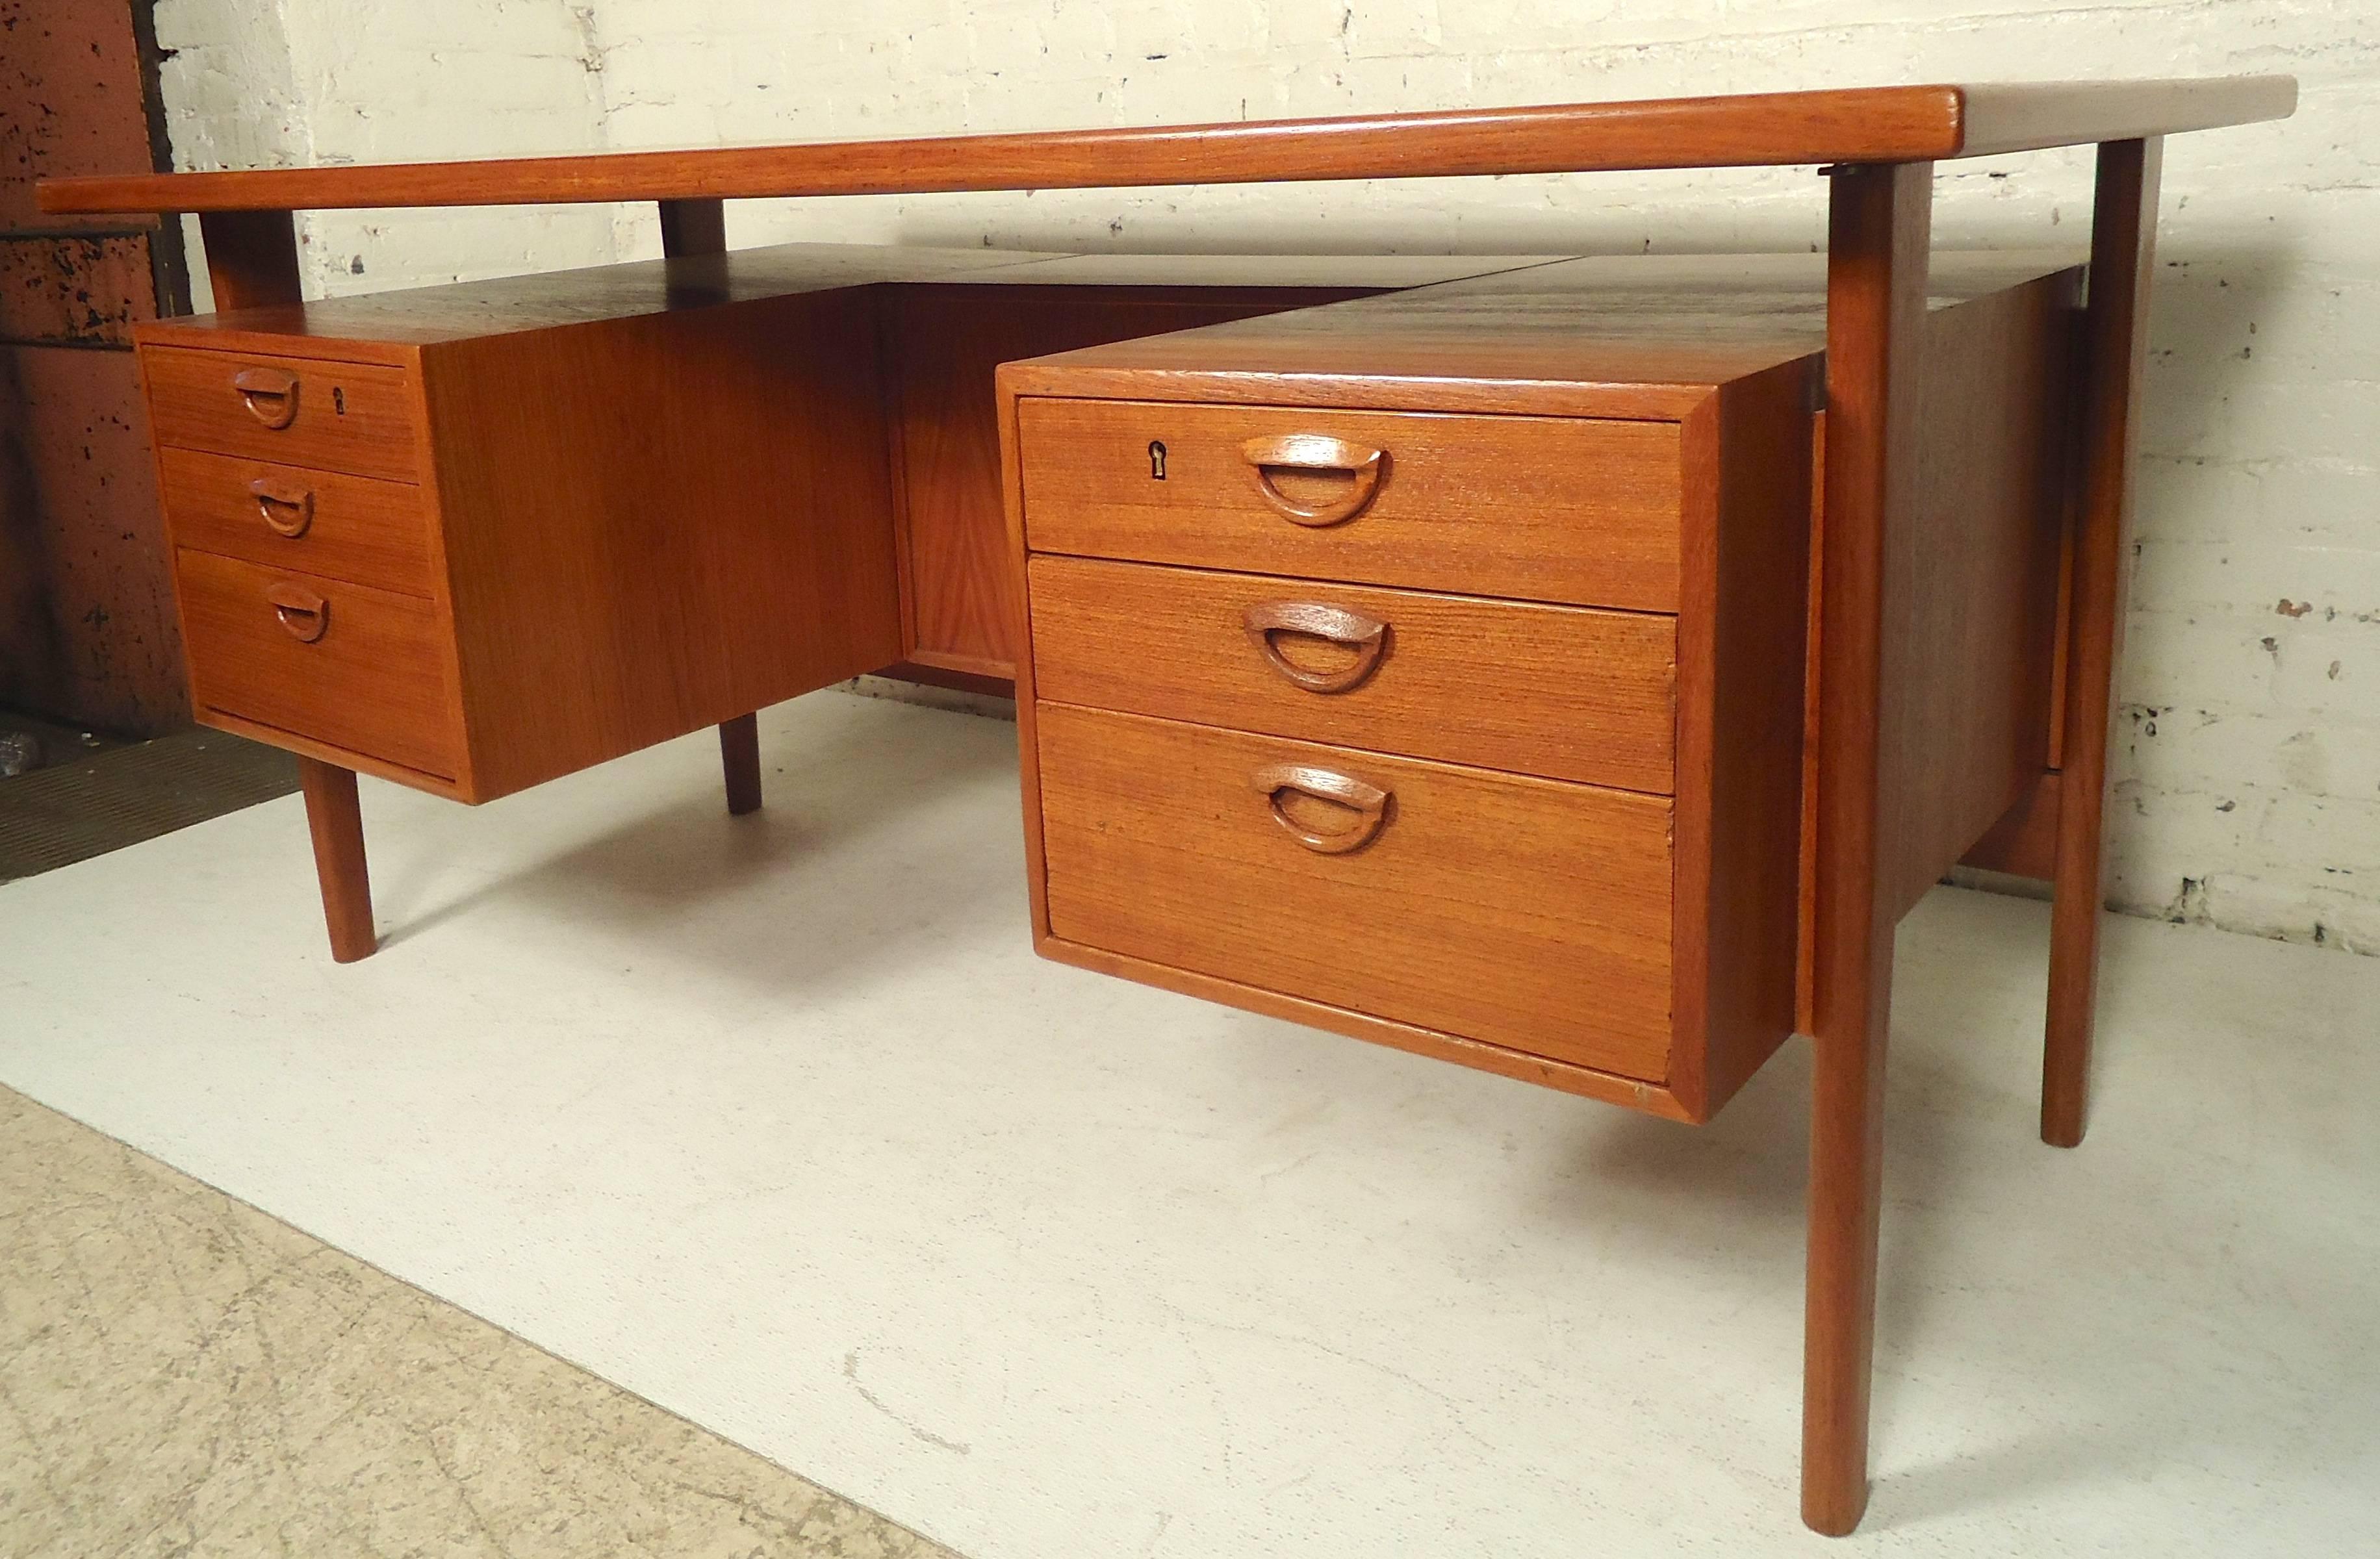 Teak Danish desk with floating top. Six drawers with sculpted handles, tapered legs and finished back with open storage.

(Please confirm item location - NY or NJ - with dealer).
 